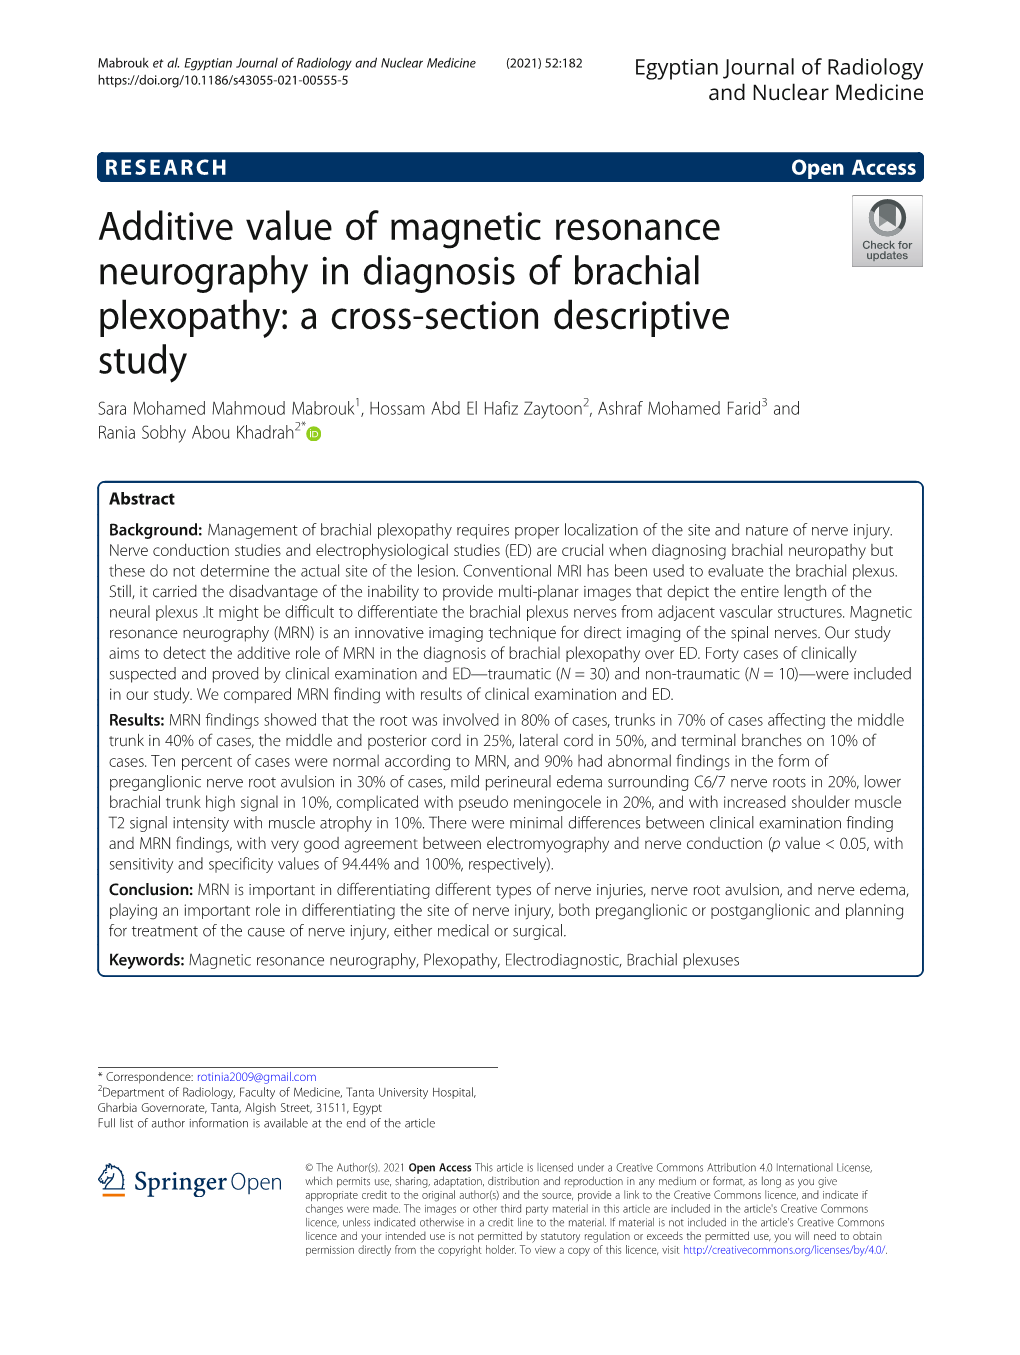 Additive Value of Magnetic Resonance Neurography in Diagnosis Of